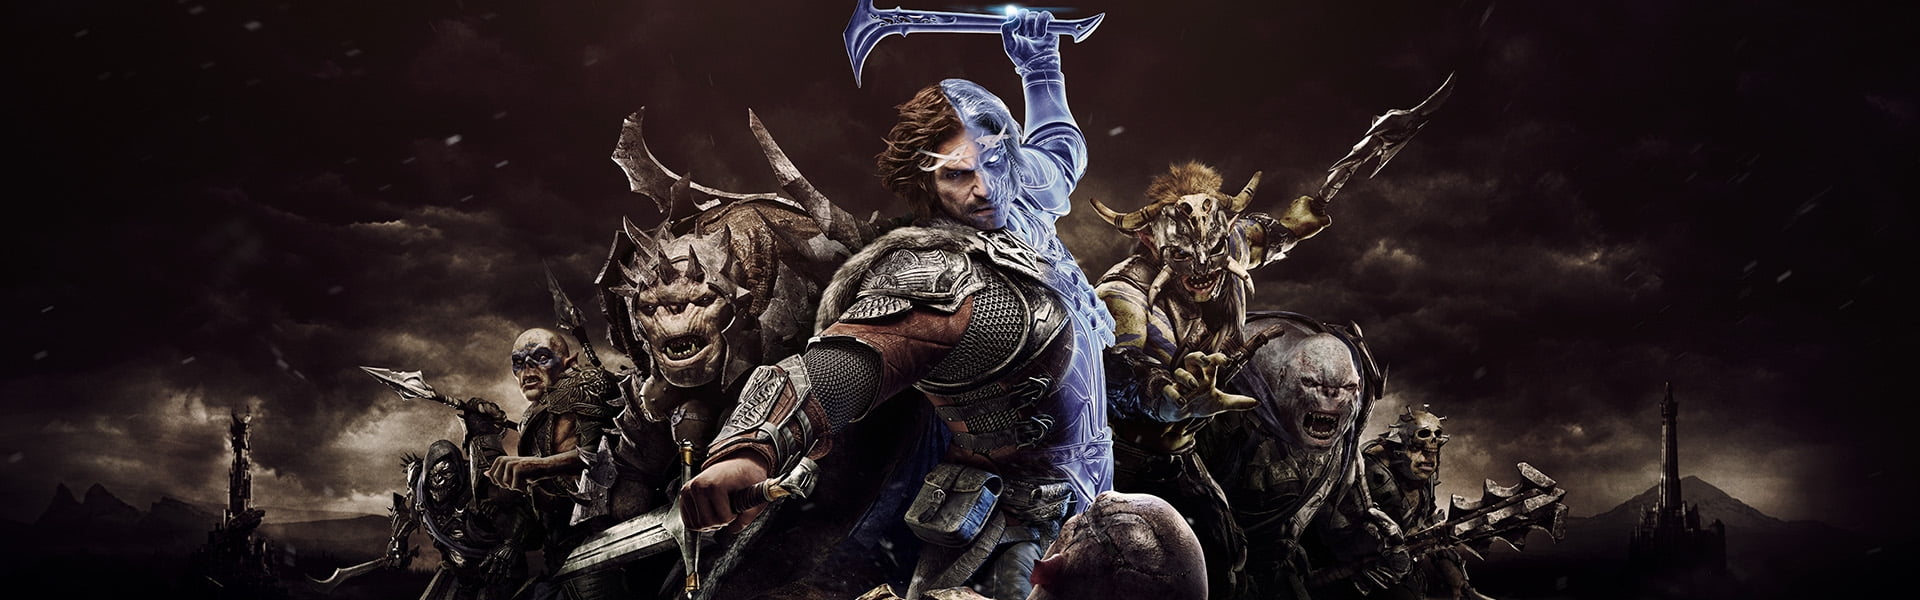 Middle-Earth: Shadow of War Free Content Updates & Features Announced 13